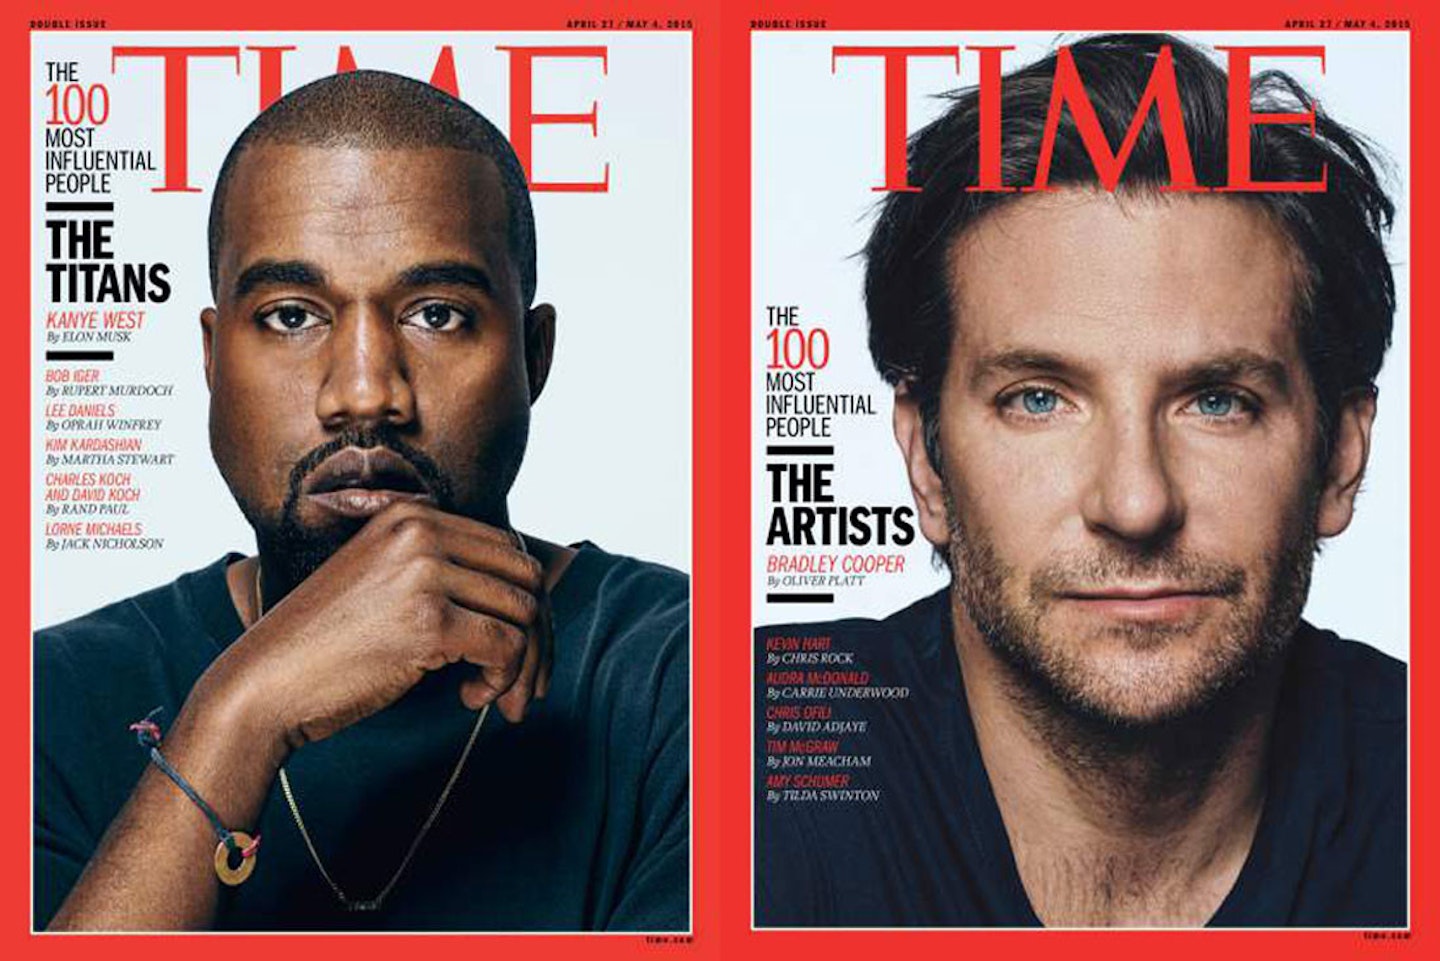 Bradley Cooper and Kanye West feature on this year's covers [Time]